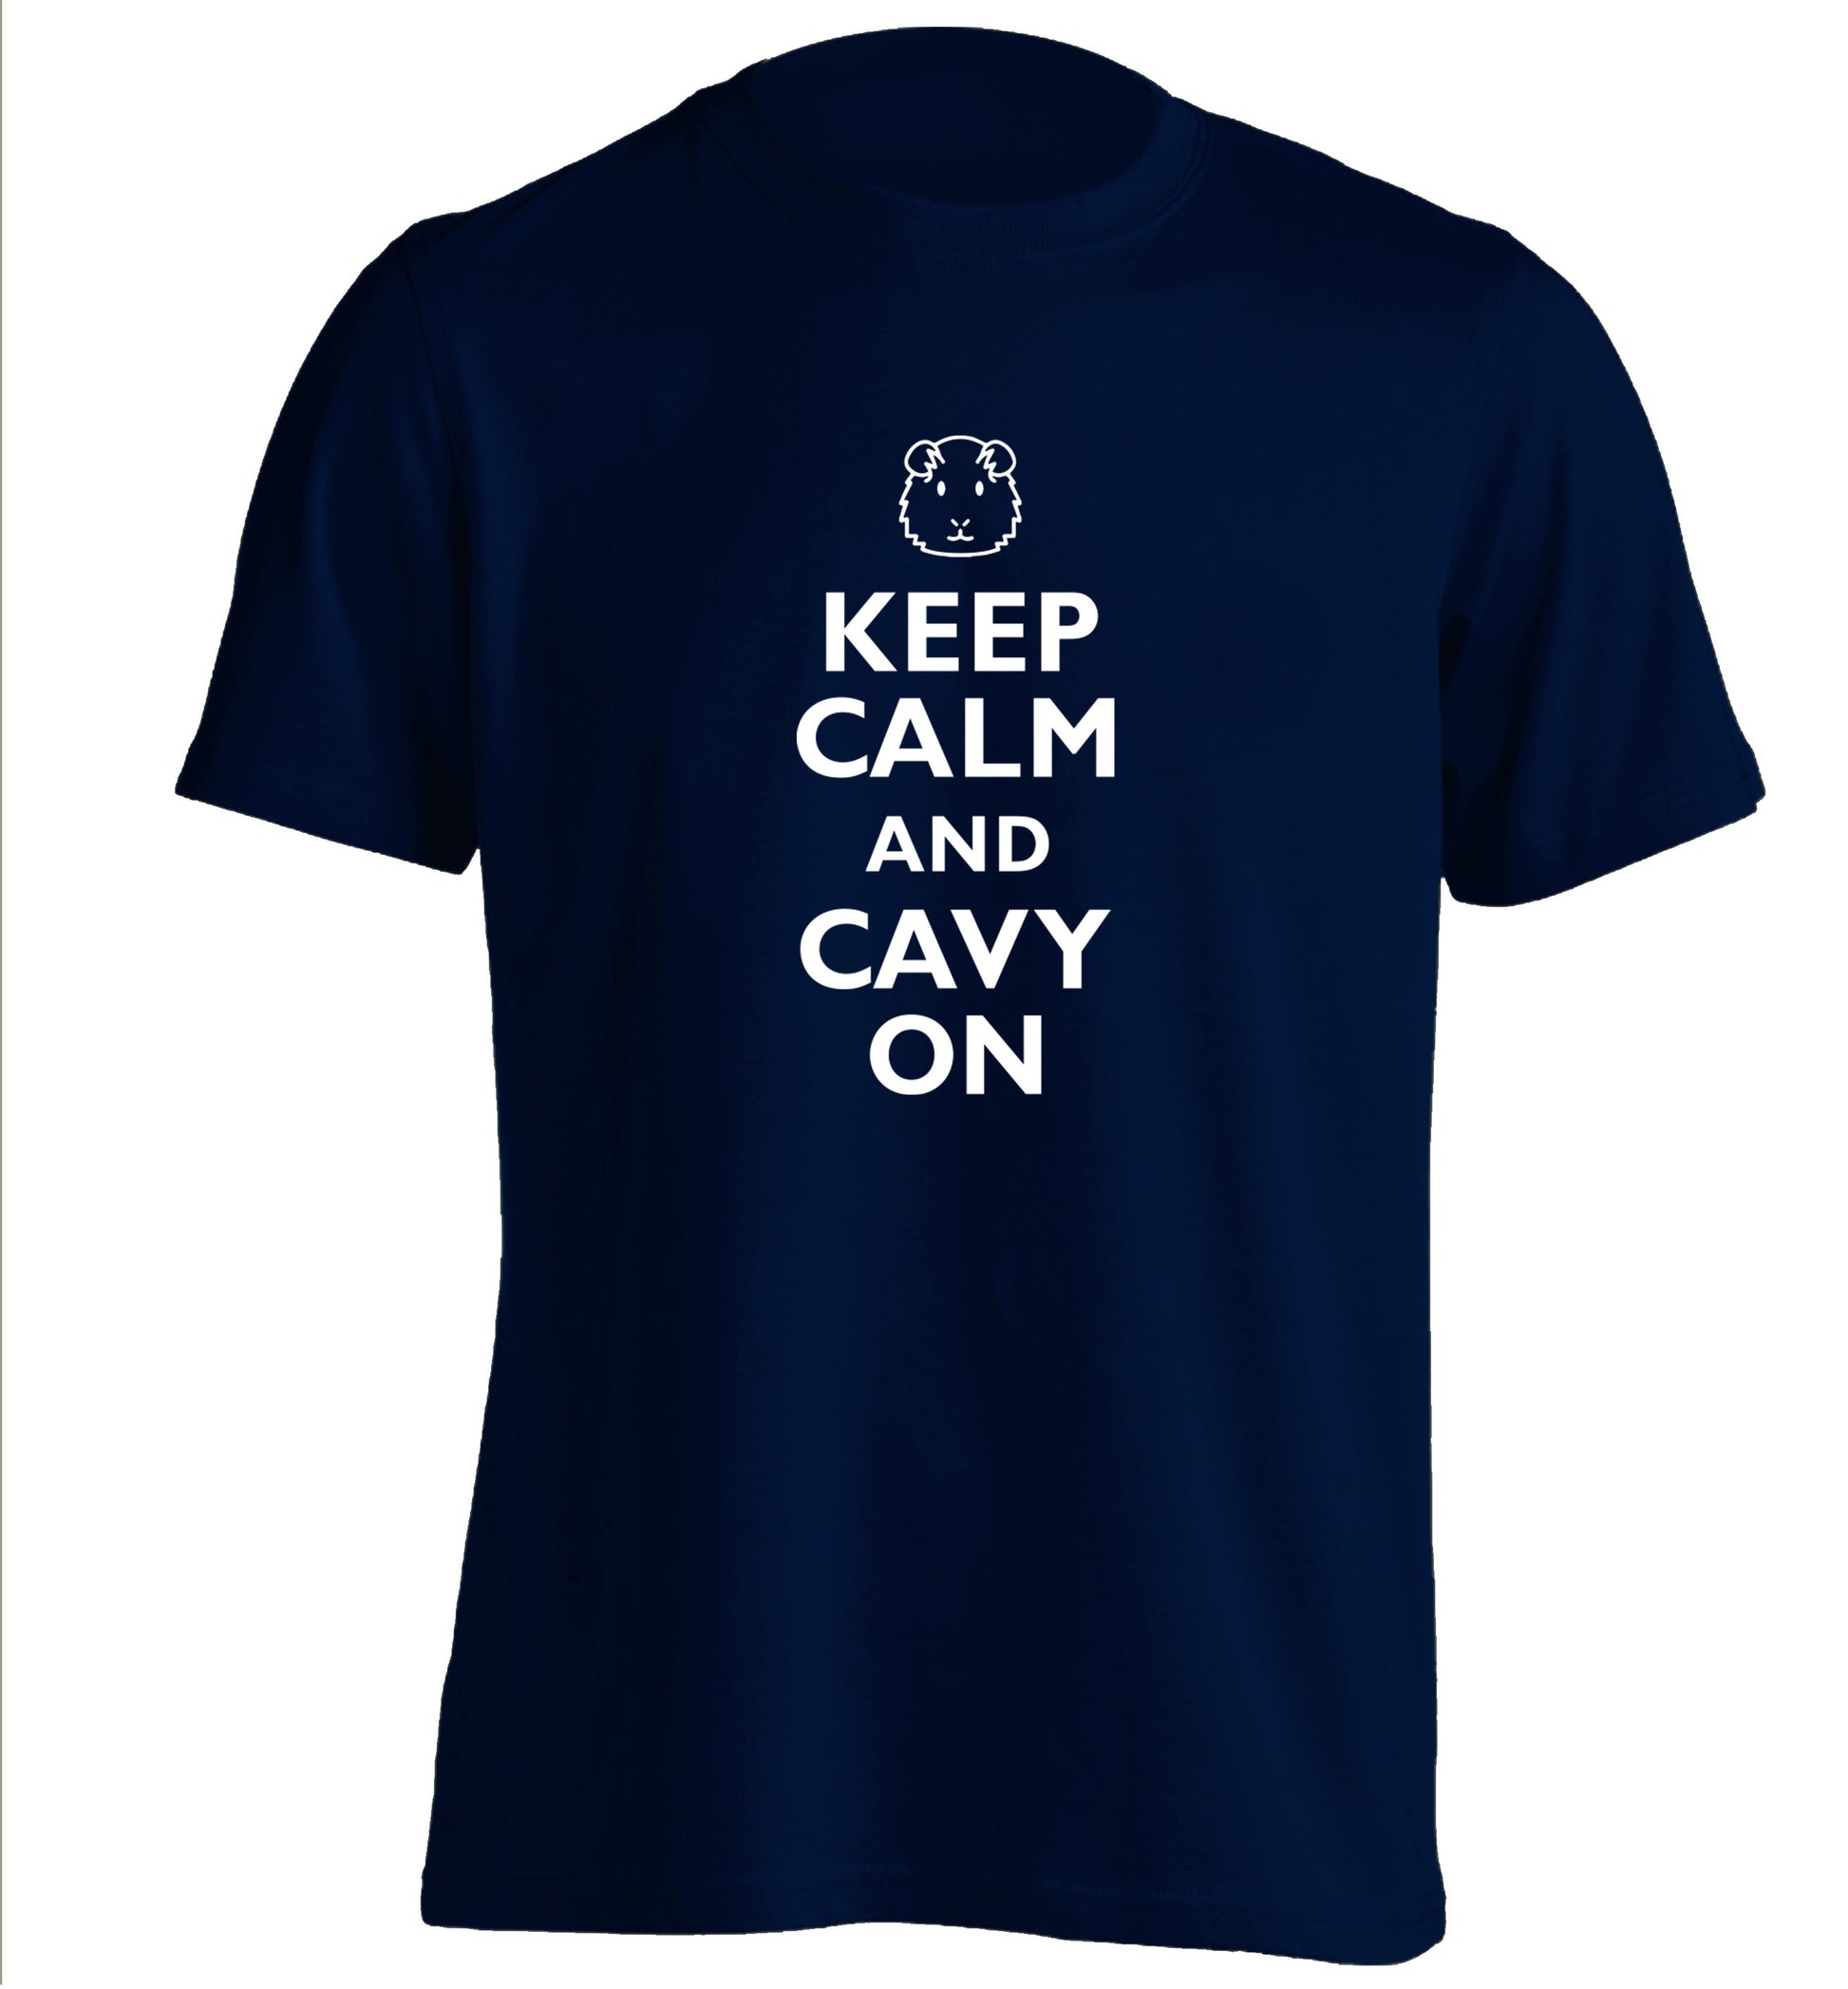 Keep calm and cavvy on adults unisex navy Tshirt 2XL